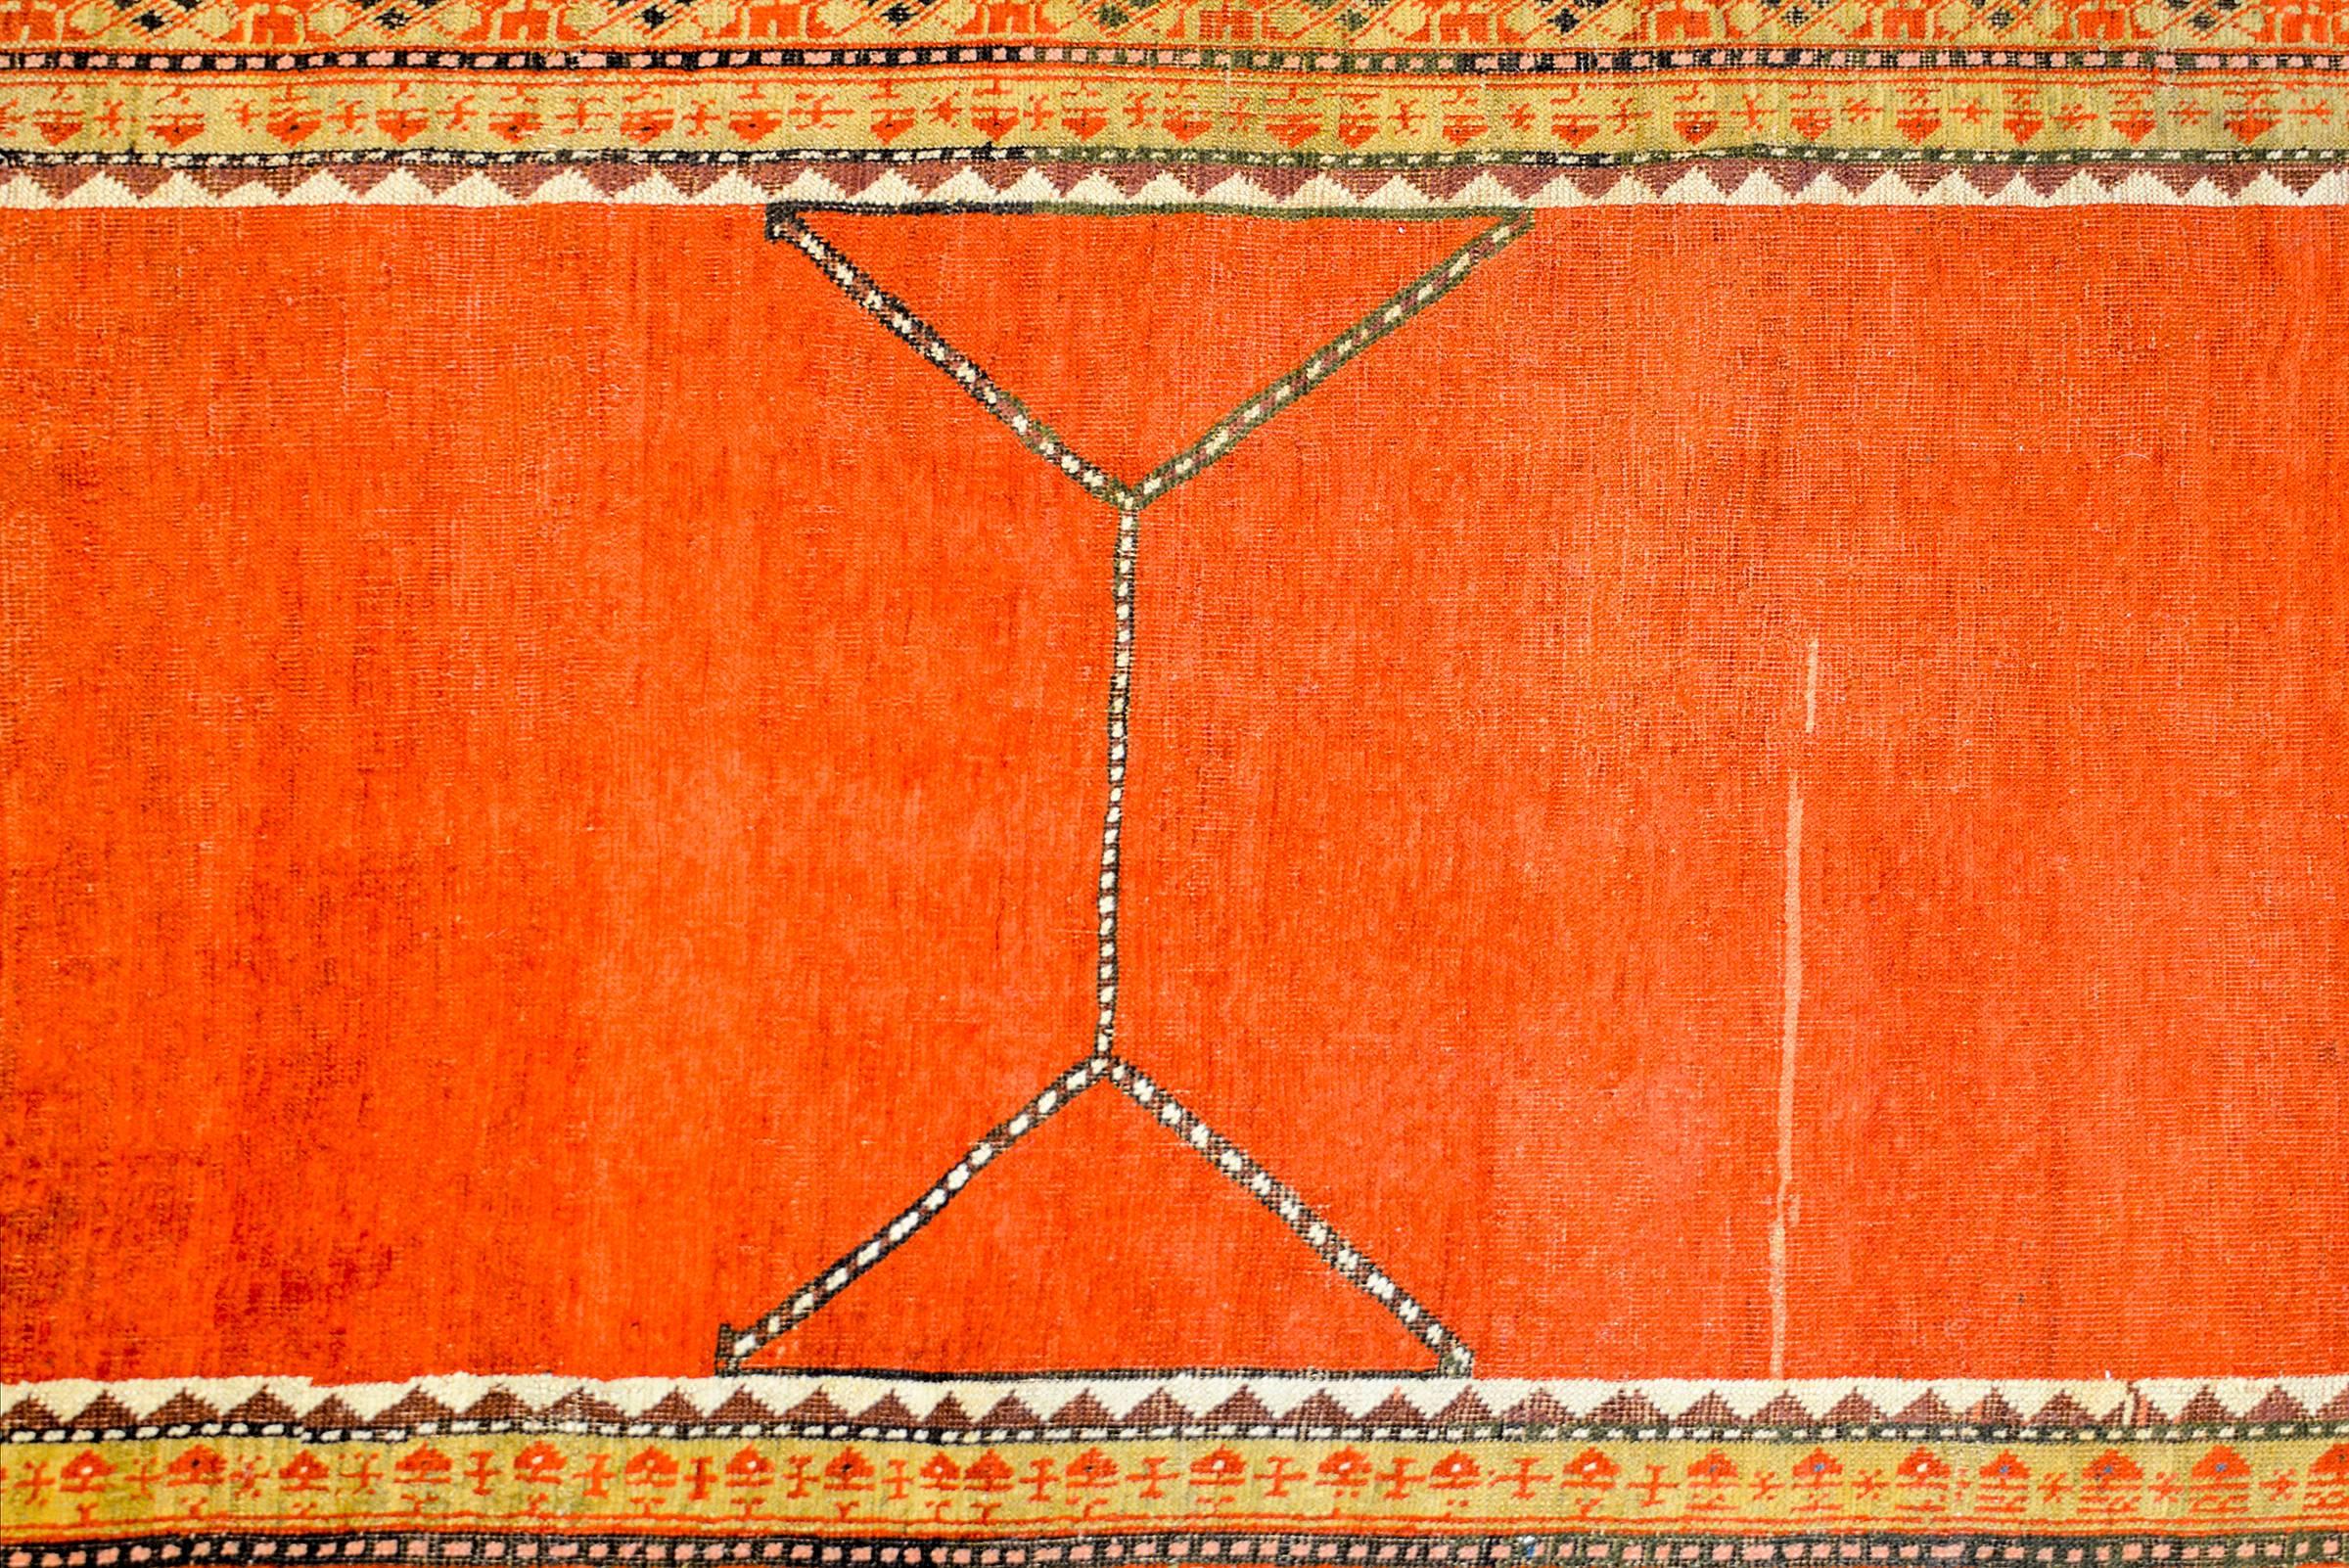 A stunning 1920s Turkish Konya rug with a bold abrash orange field with a simple line pattern across the centre, surrounded by a beautiful border of three stylized floral patterned stripes woven in pale green and crimson colors.